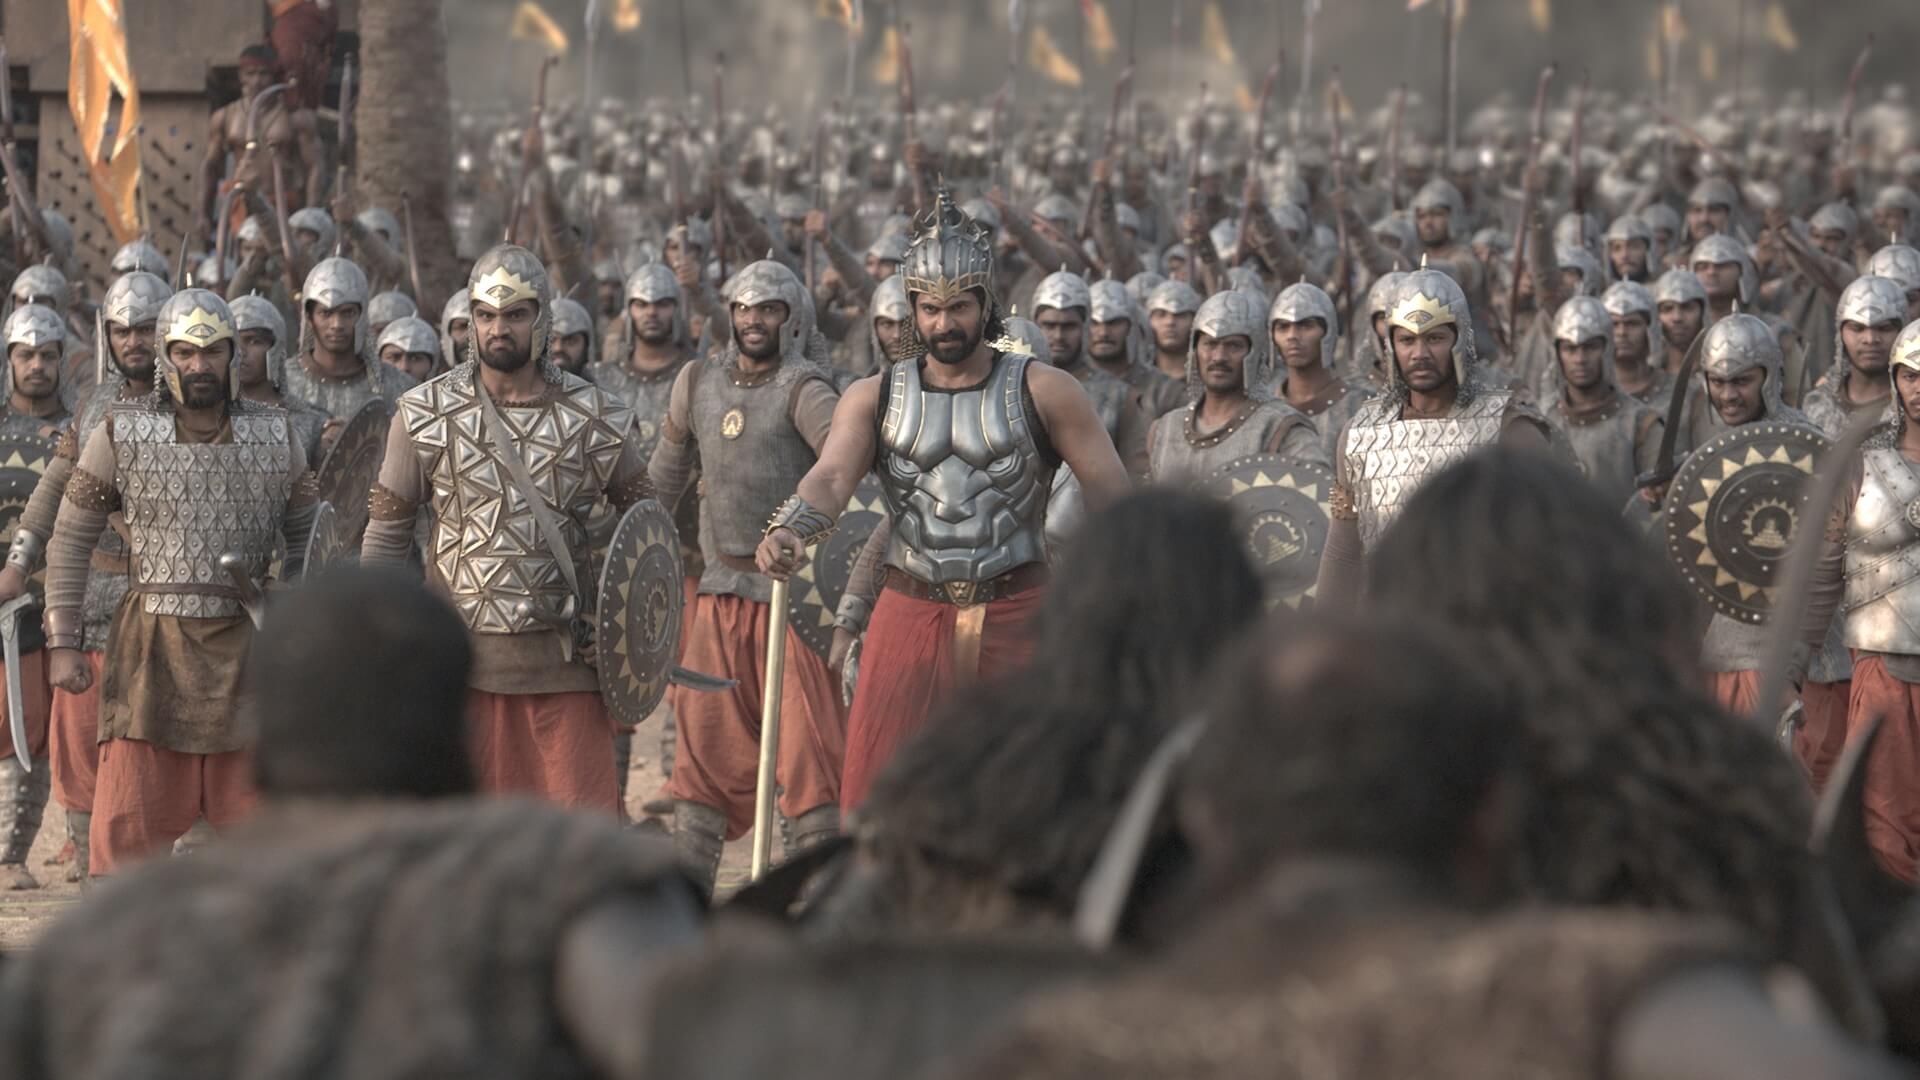 baahubali vfx, compositing, animation, 3d, visual effects